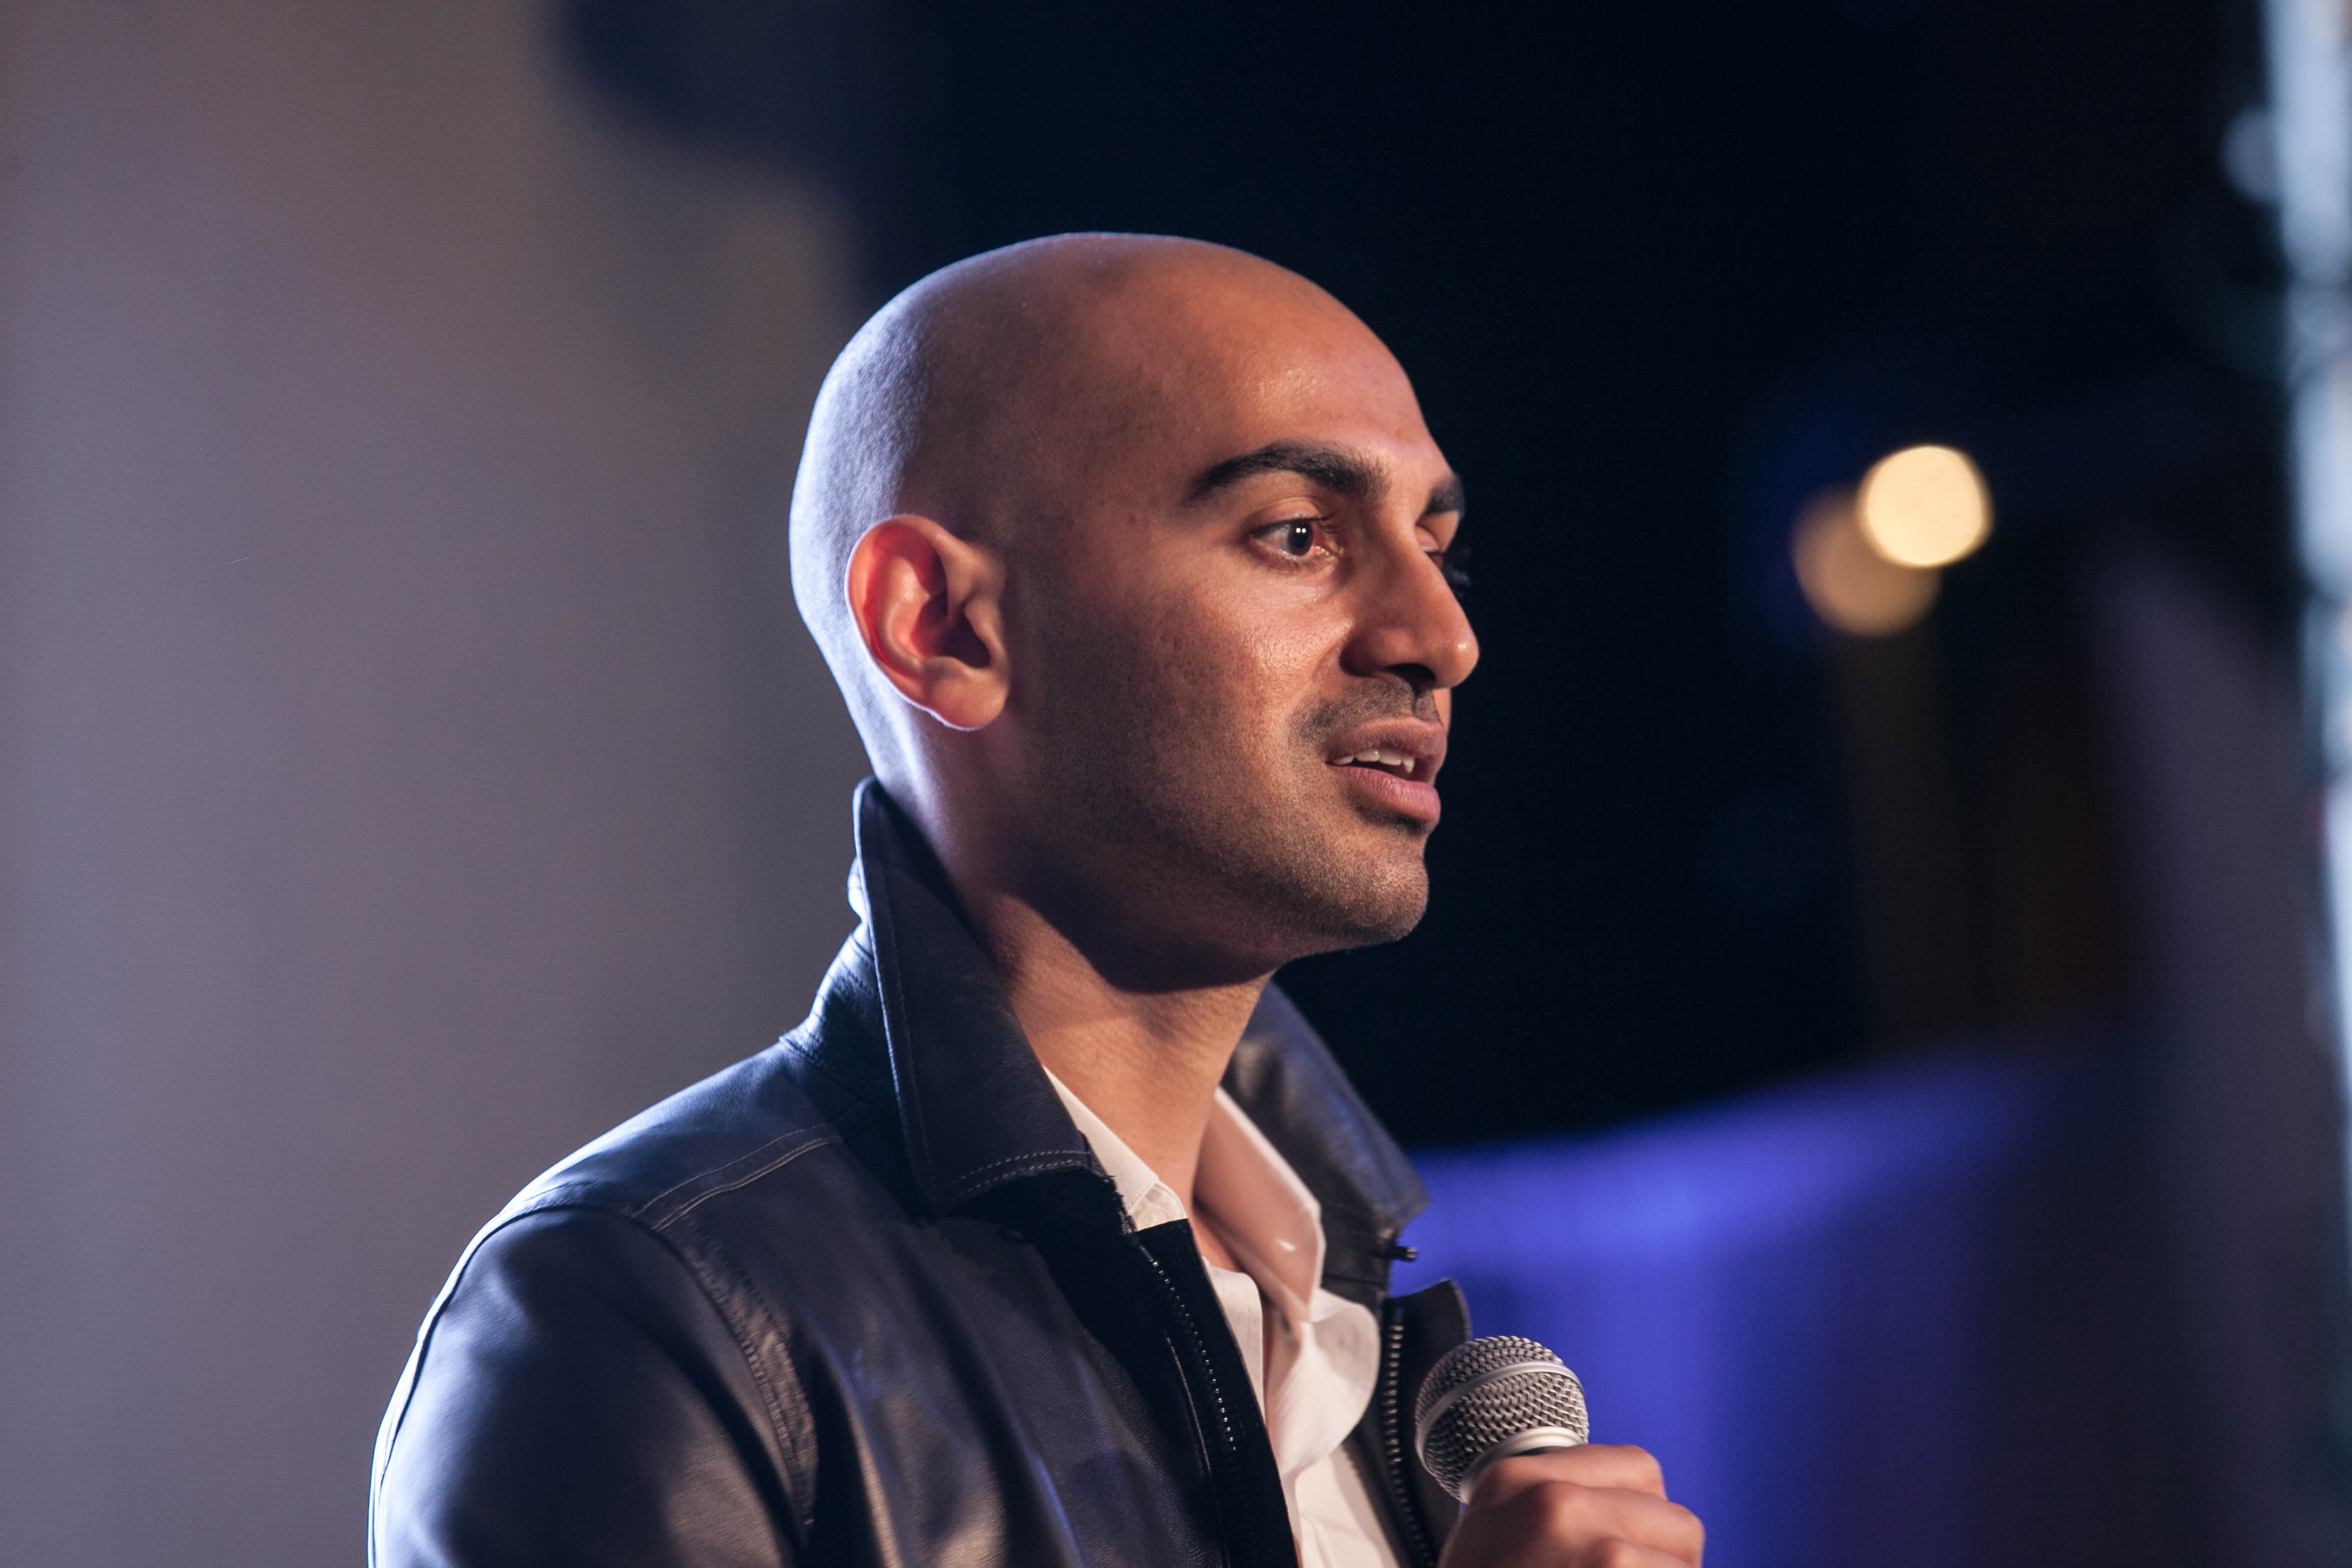 Neil Patel at Traction conference